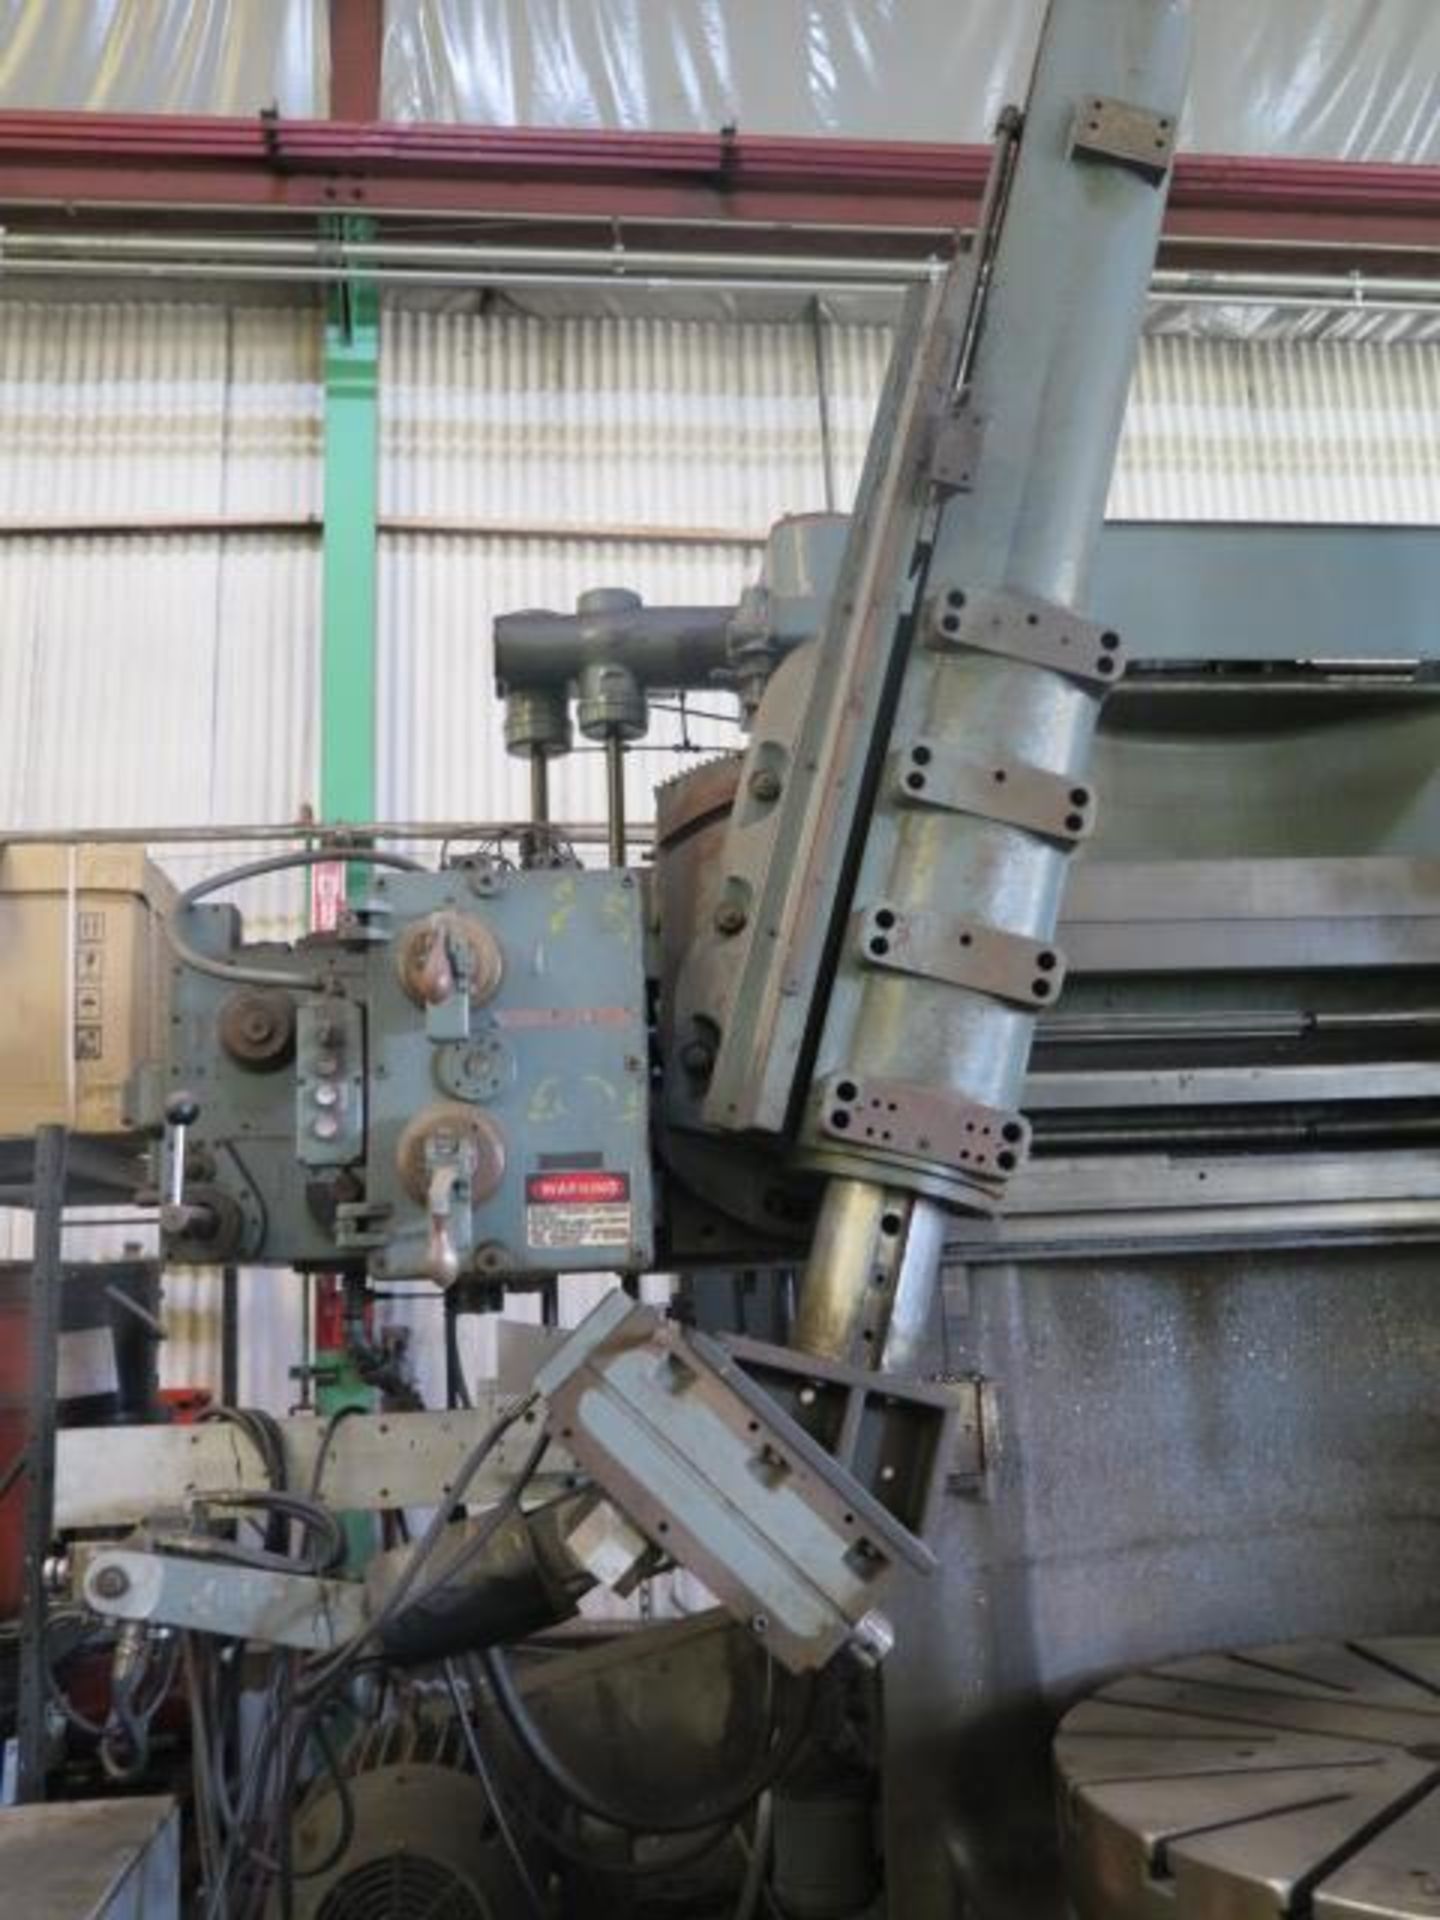 Bullard 54” Vertical Boring Mill w/ 4.3-160 RPM, 63” Swing, Hyd Tracer Head, SOLD AS IS - Image 10 of 17